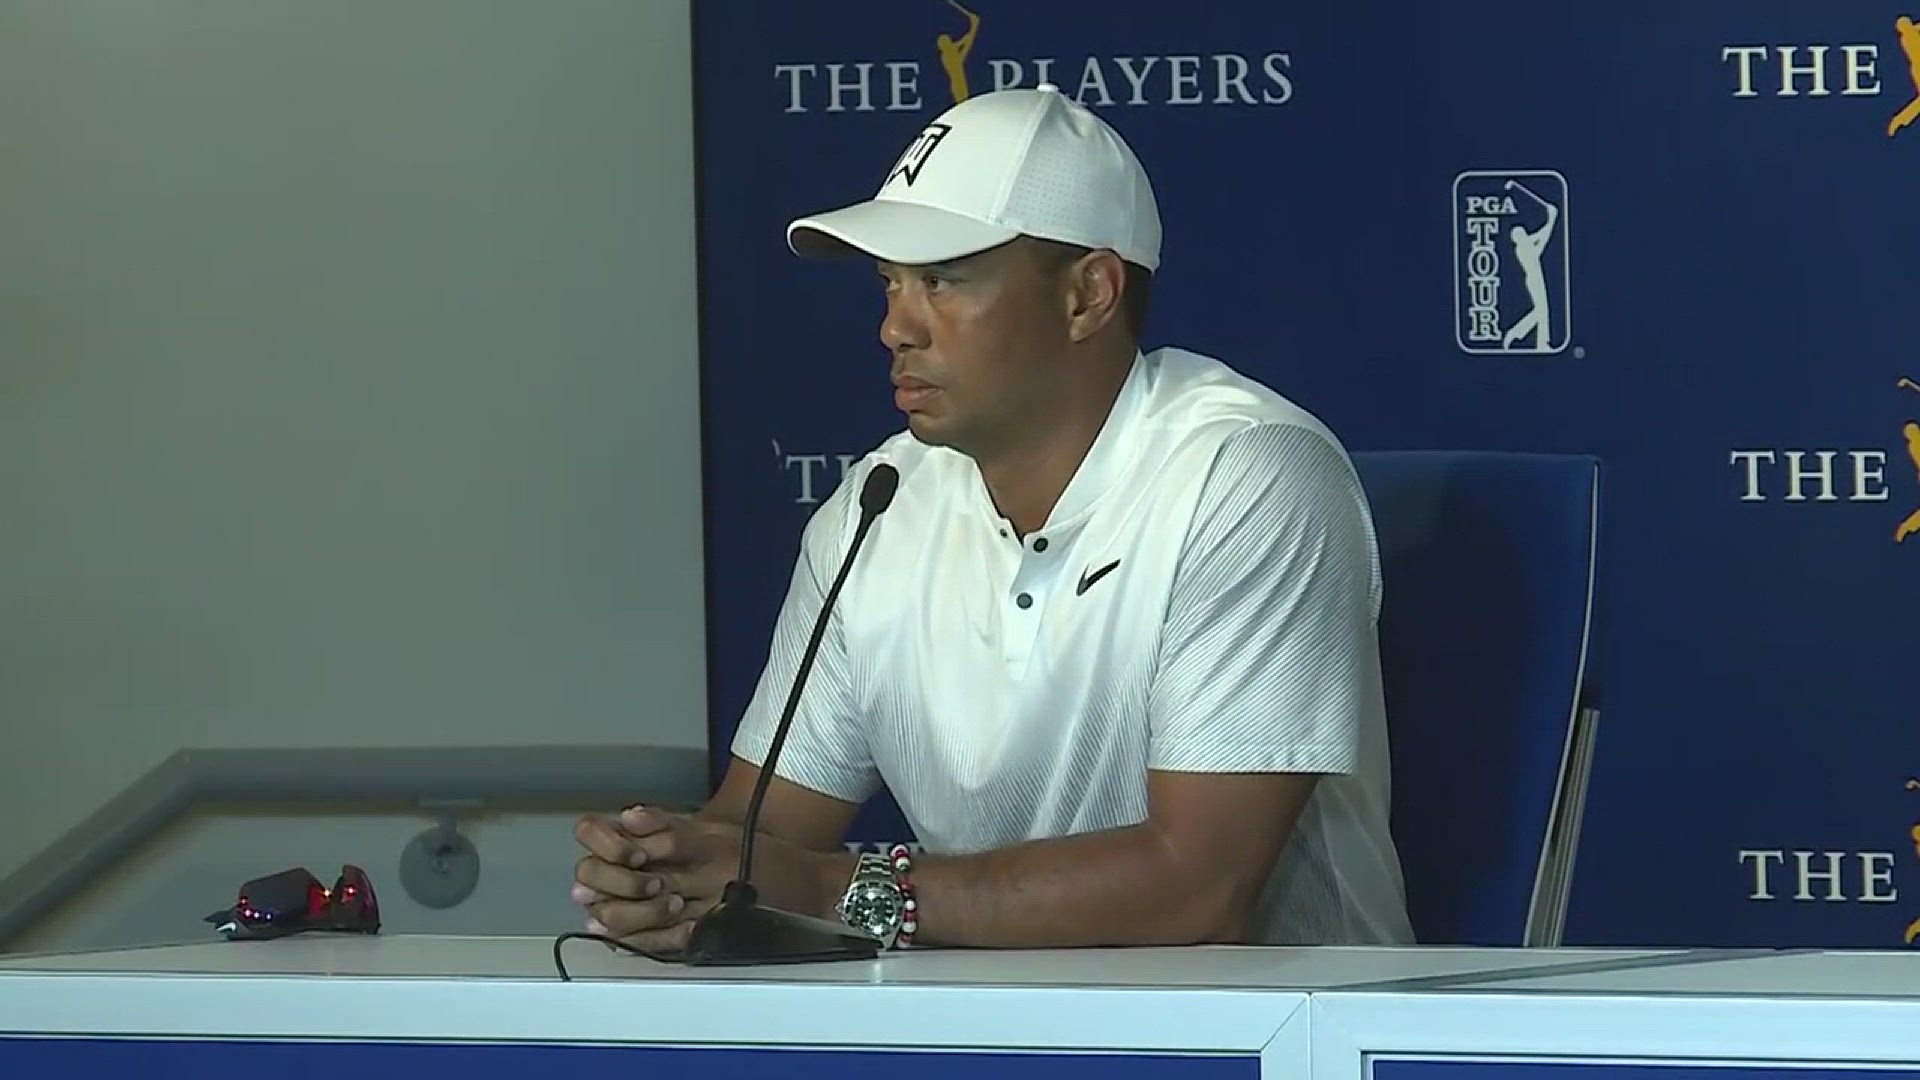 Pro golfer Tiger Woods discusses The Players Championship today with the media.